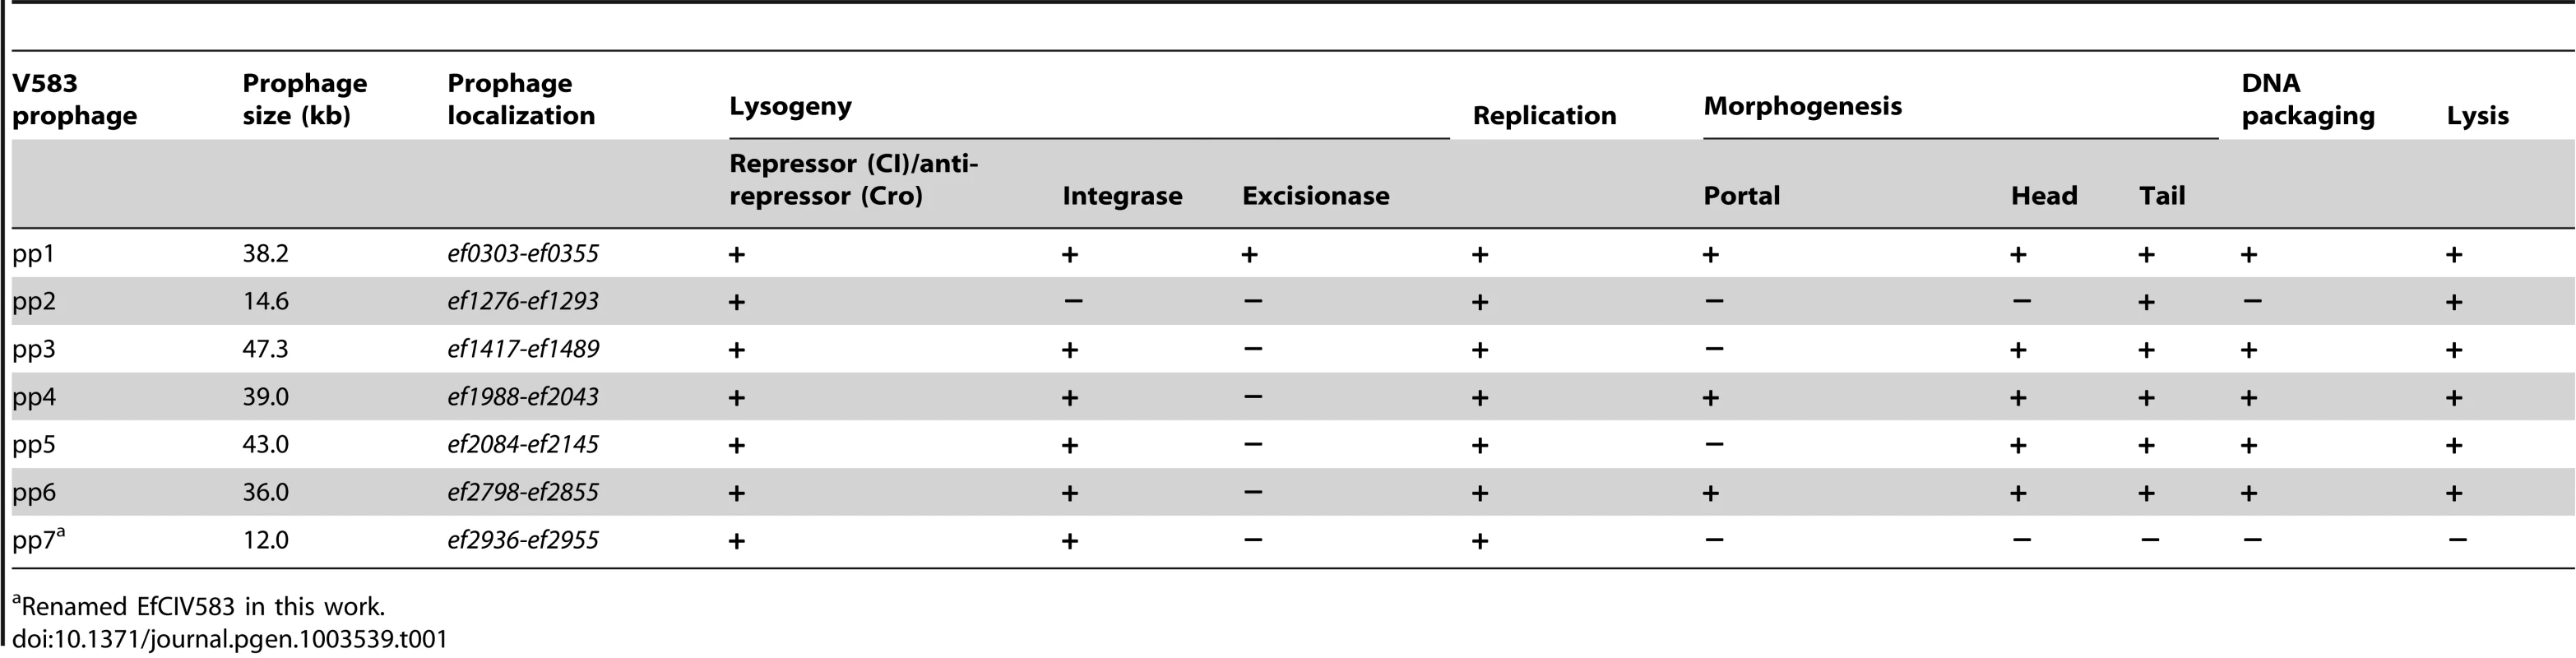 Summary of predicted essential phage functions in V583 prophages.